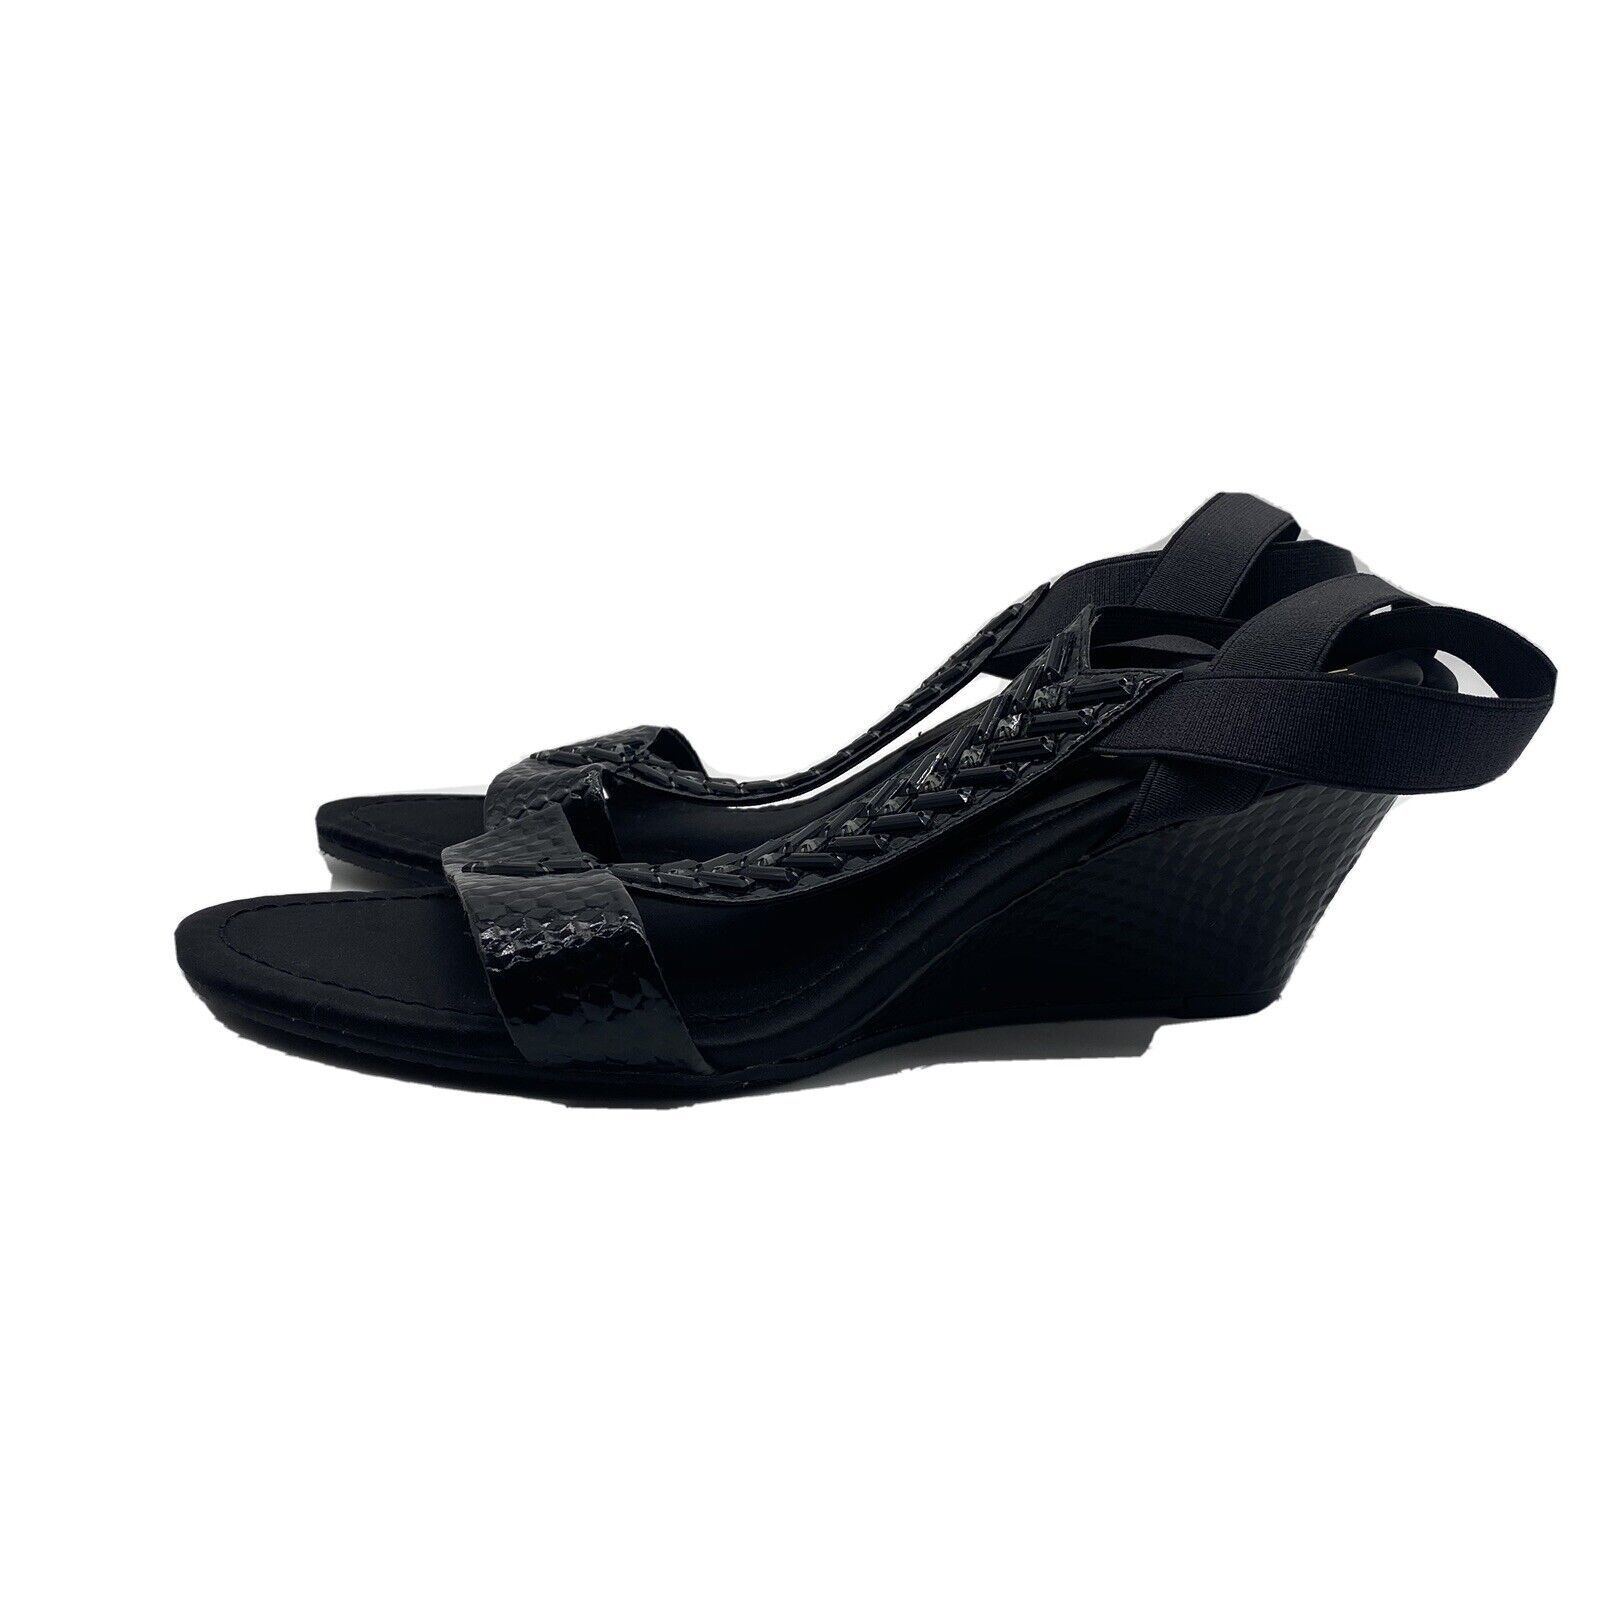 Primary image for Womens New York Transit Black Wedge Sandals, Size 9.5M